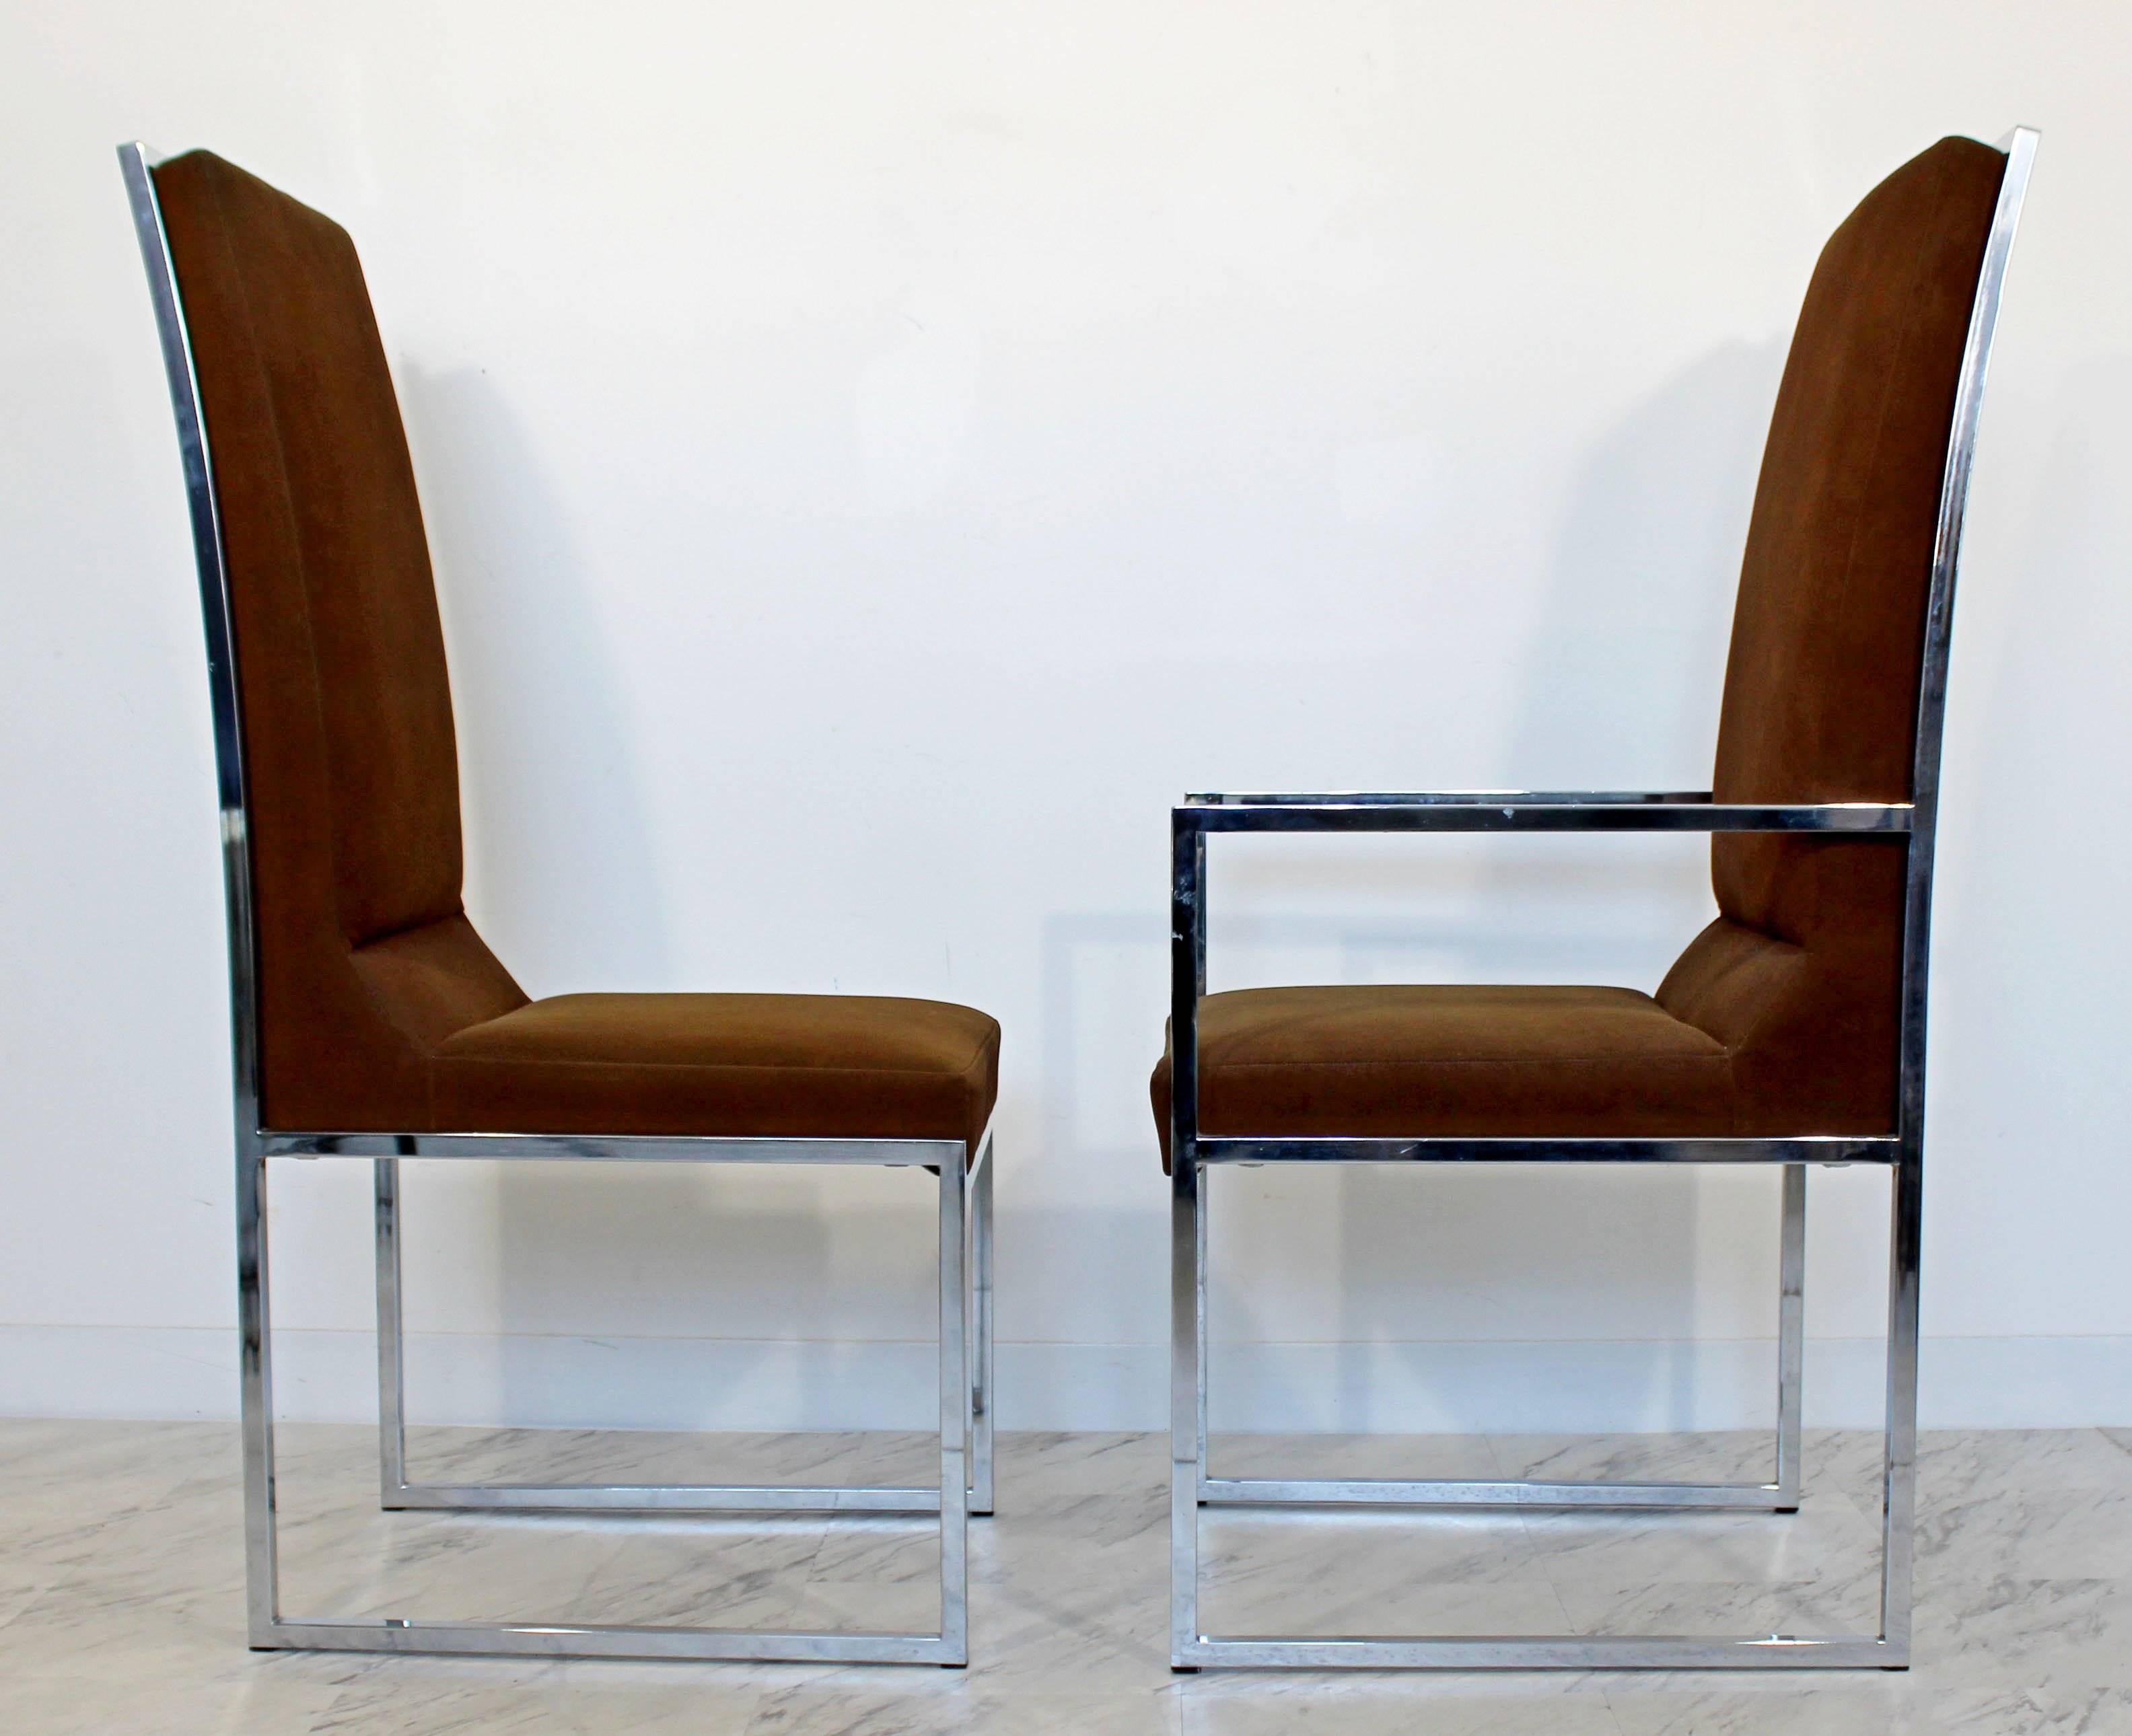 Late 20th Century Mid-Century Modern Milo Baughman for DIA Set of Six Chrome Dining Chairs, 1970s